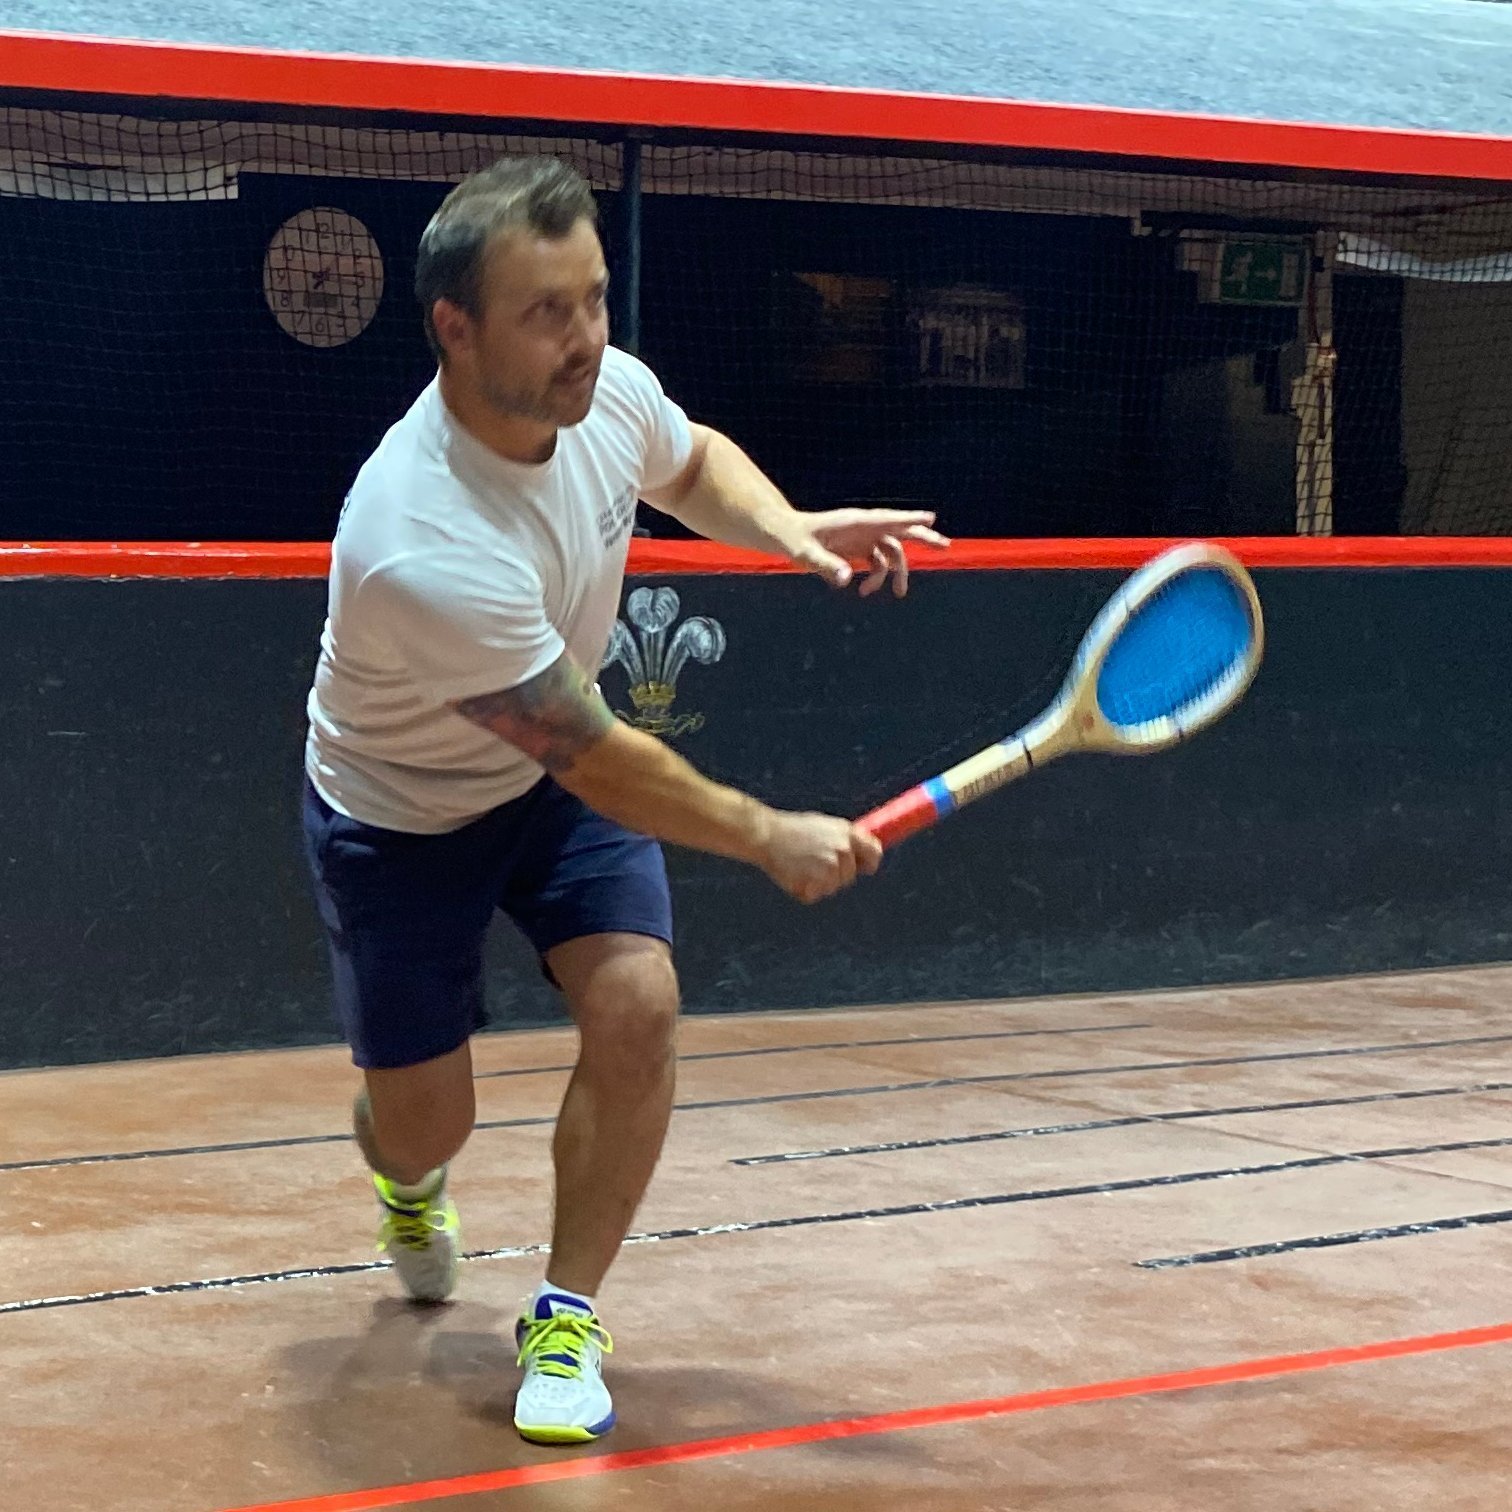 Professional real tennis player